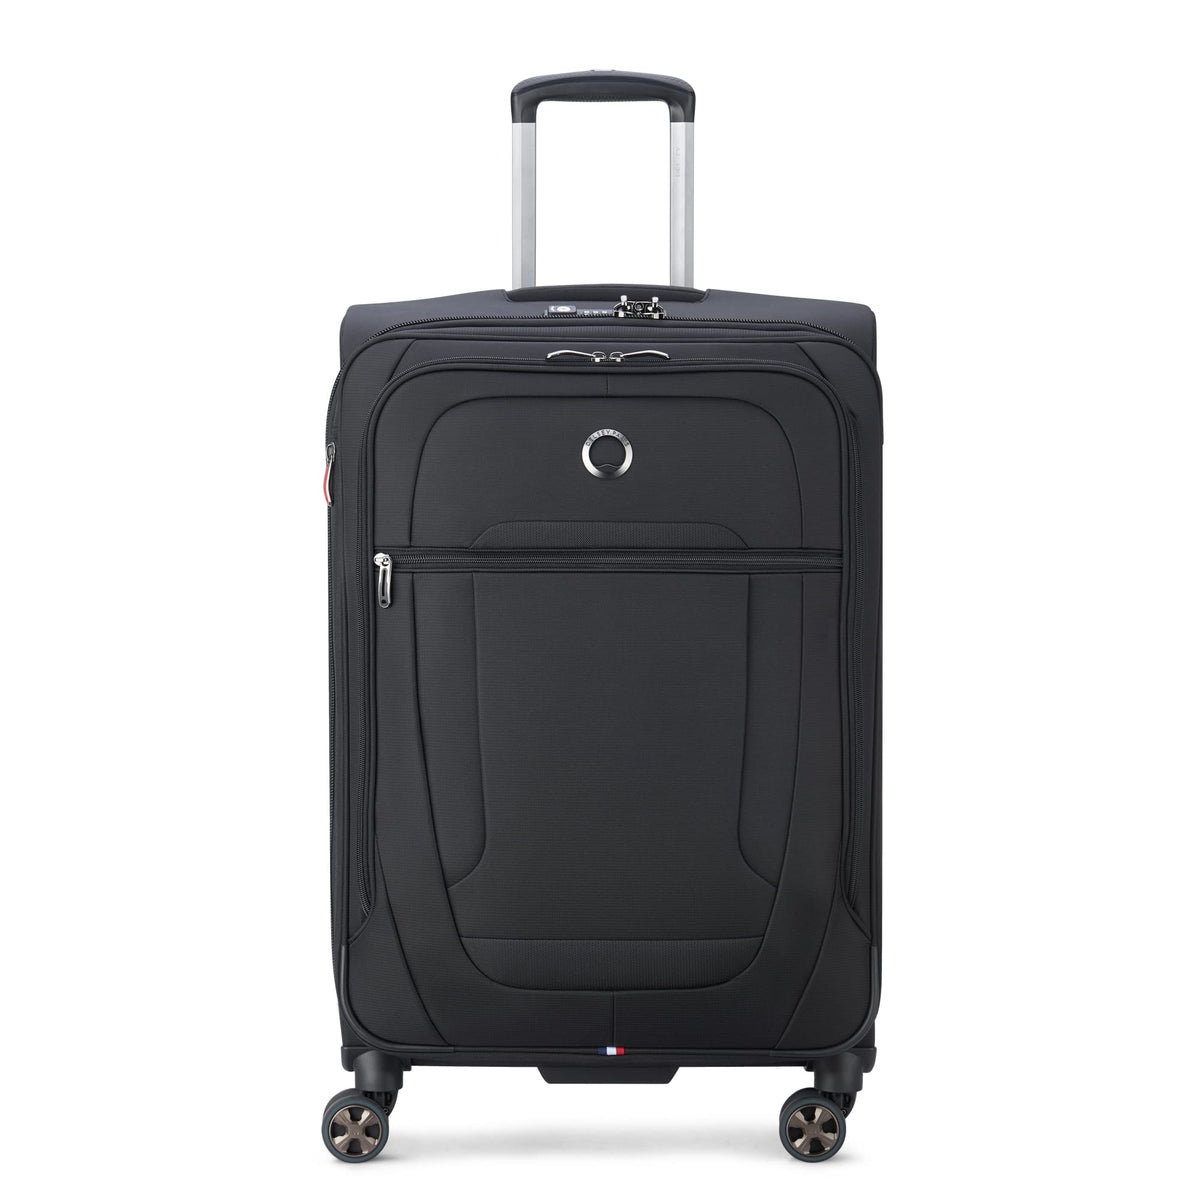 DELSEY Paris Helium DLX Softside Expandable Luggage with Spinner Wheels - Black/Checked-Medium 25 Inch